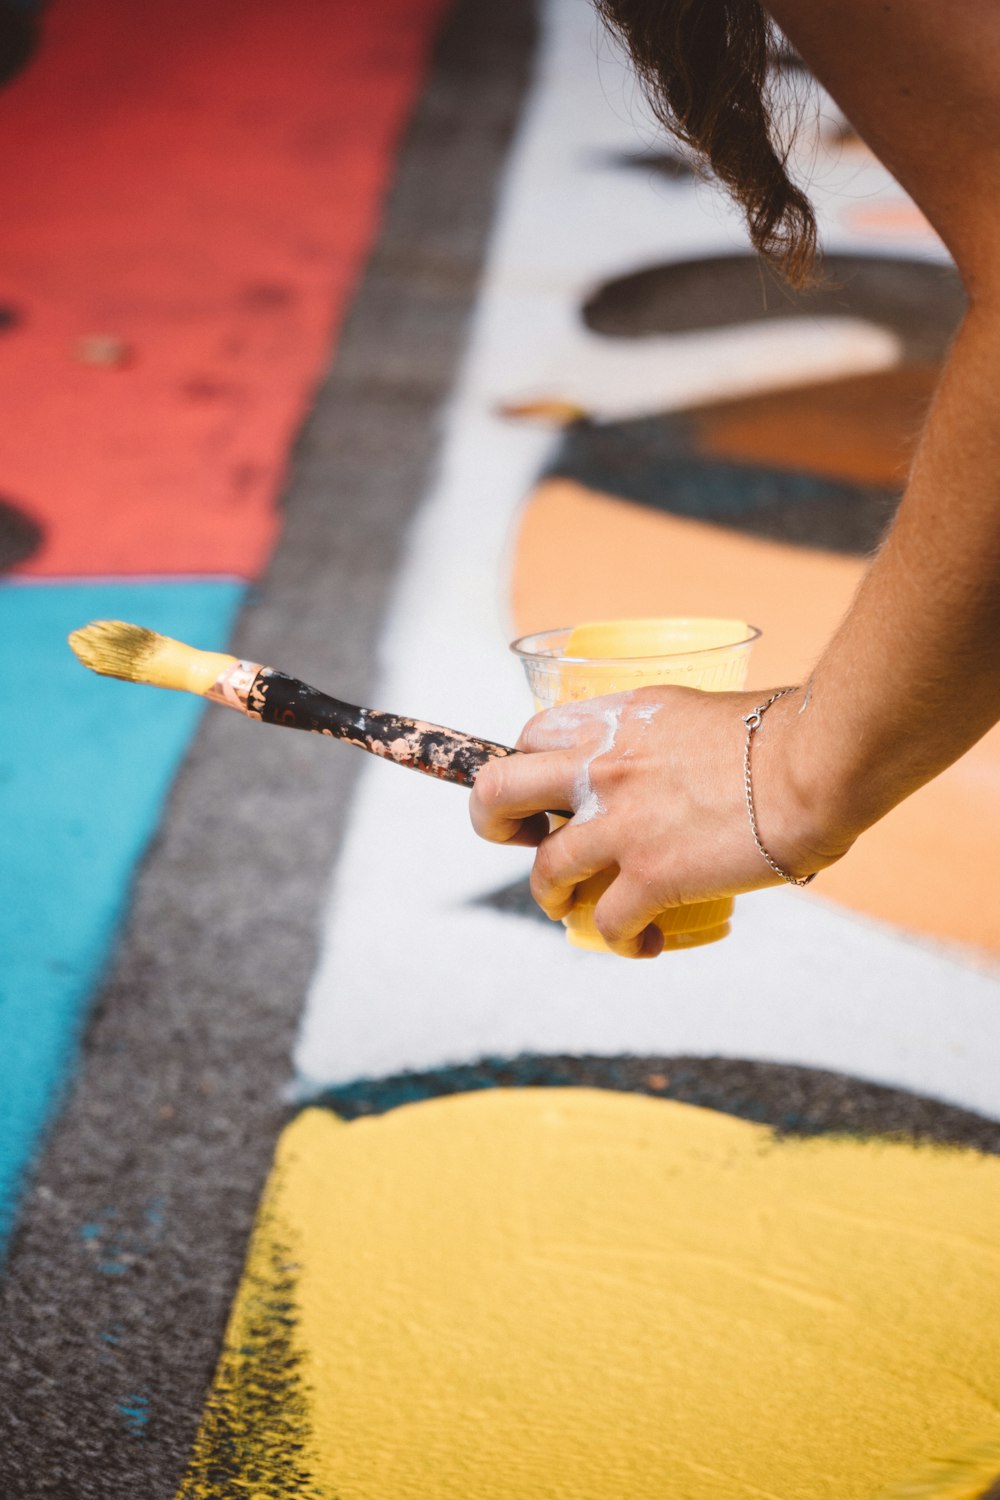 person holding cup with yellow paint and paintbrush